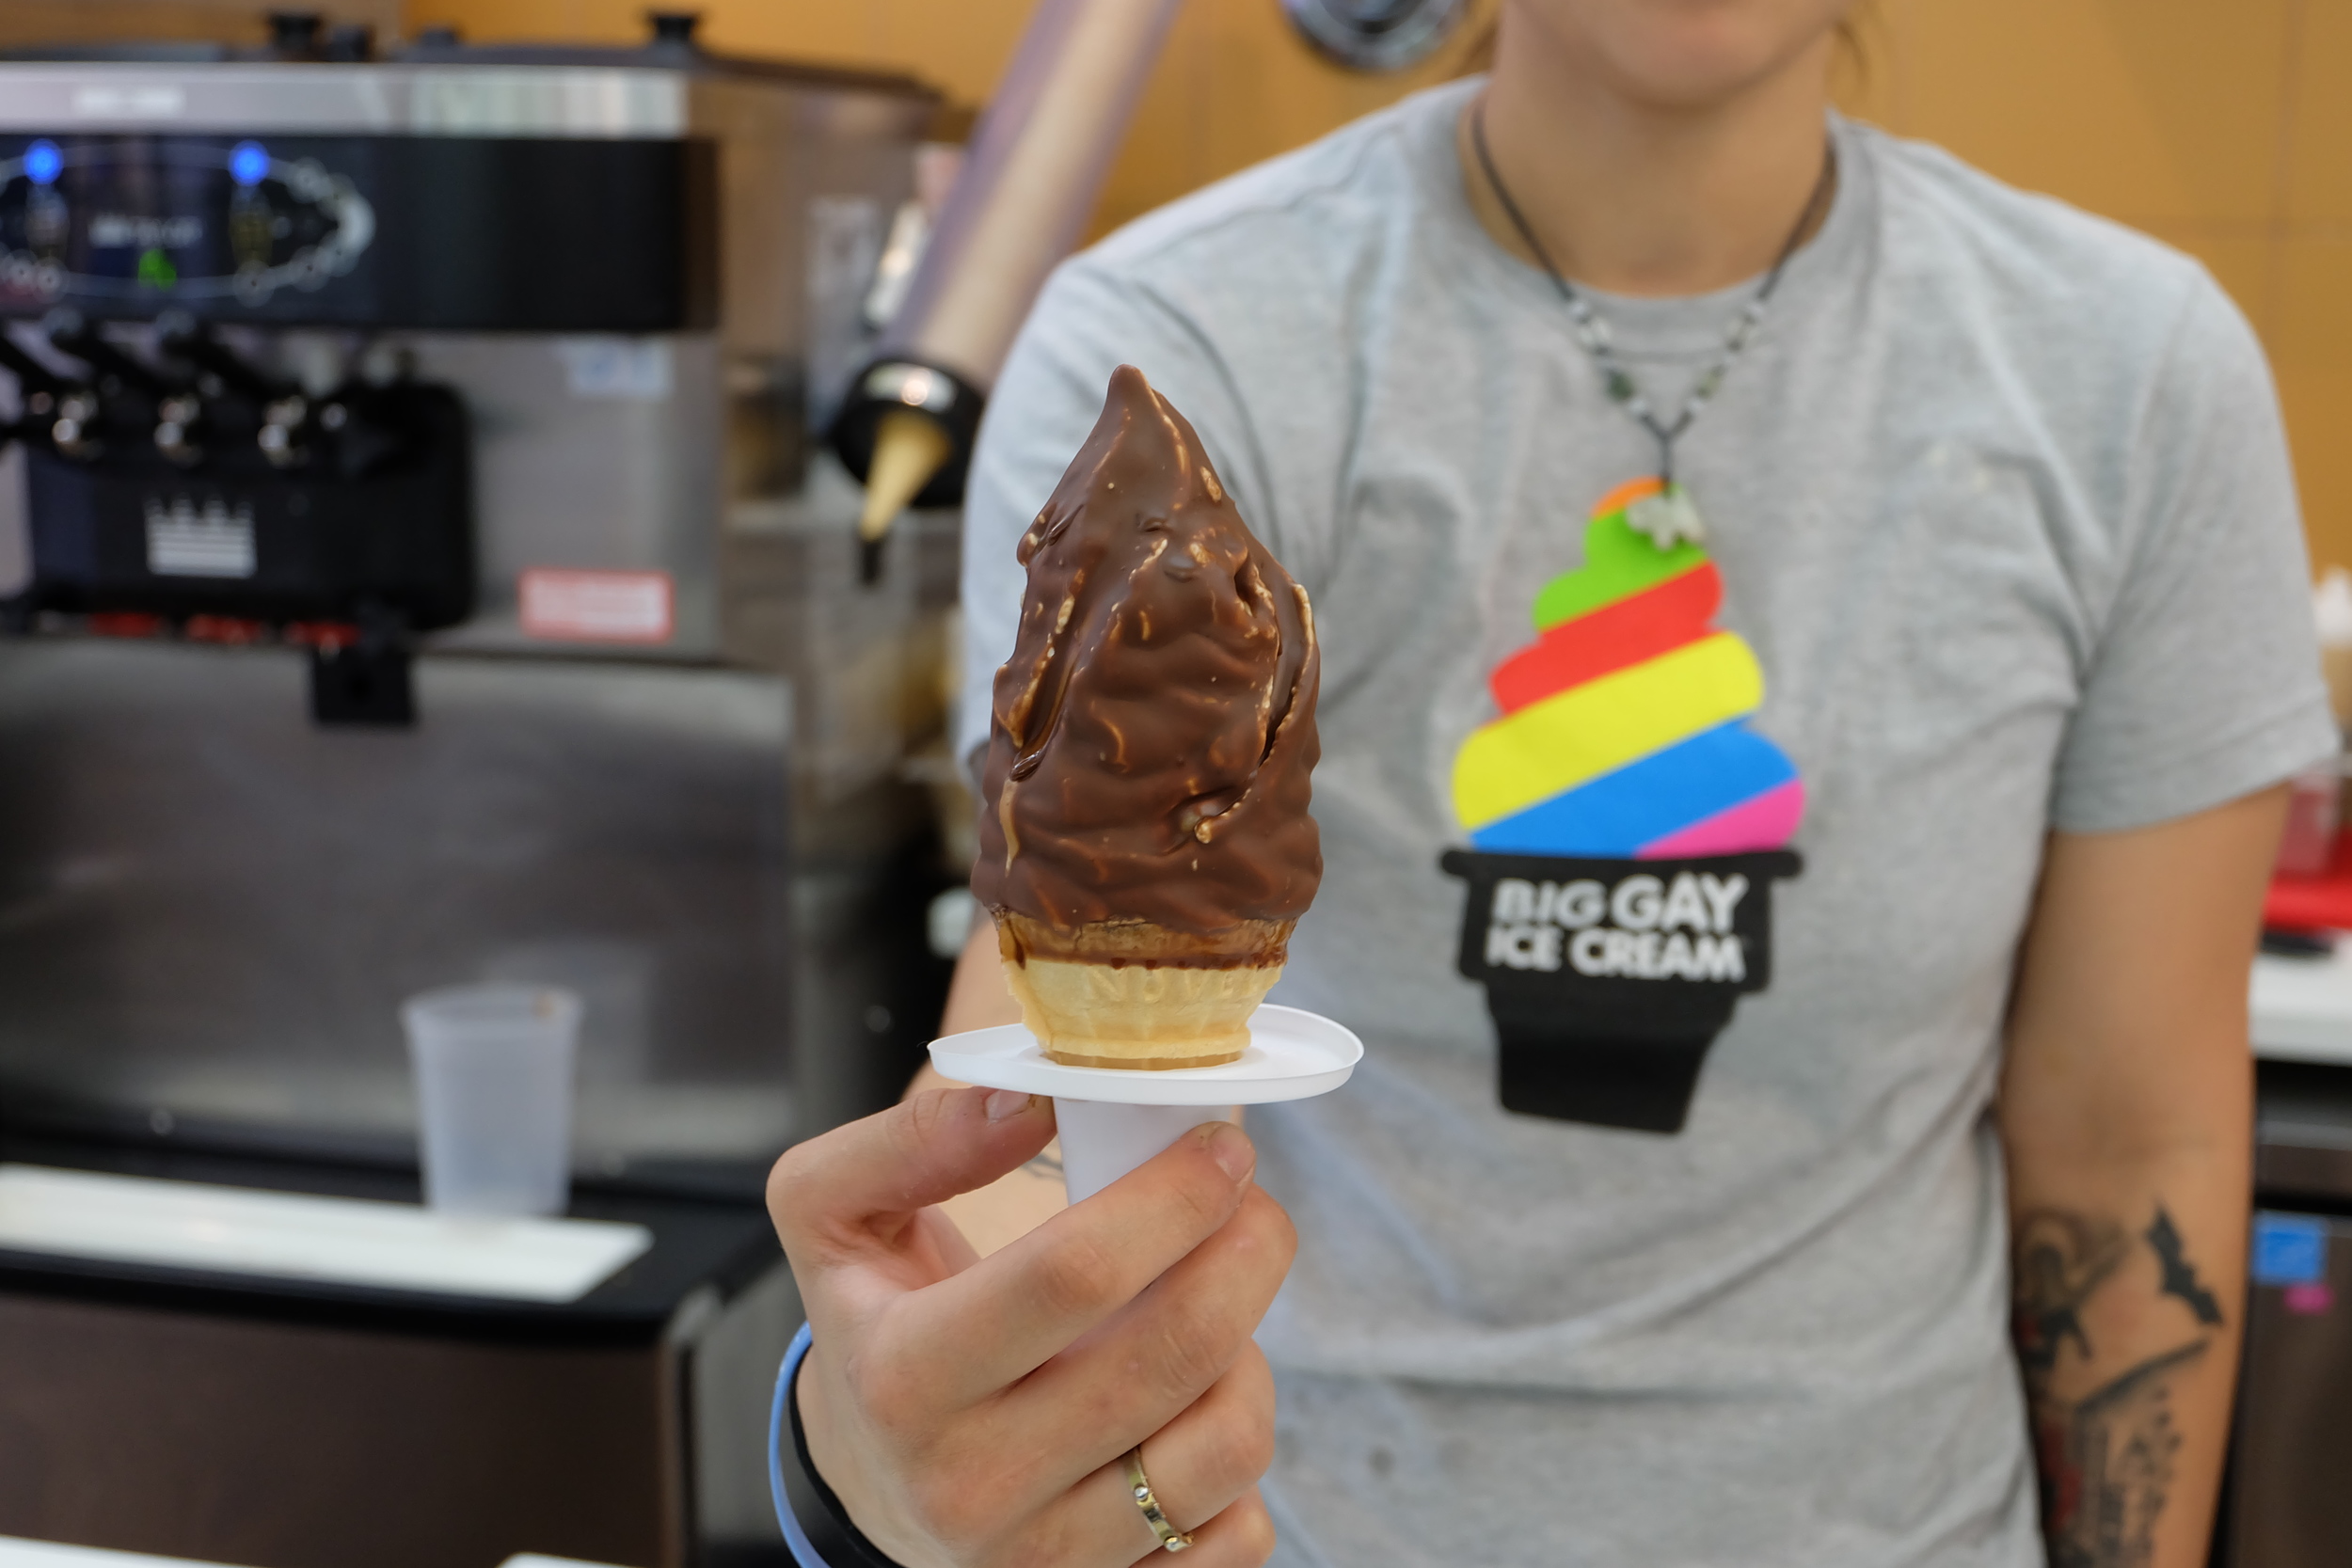 9. Big Gay Ice Cream: Big Gay Ice Cream puts a new spin on soft-serve with fun and playful ice cream flavors and names. The colorful shop in the East Village is unforgettable serving up the classic 